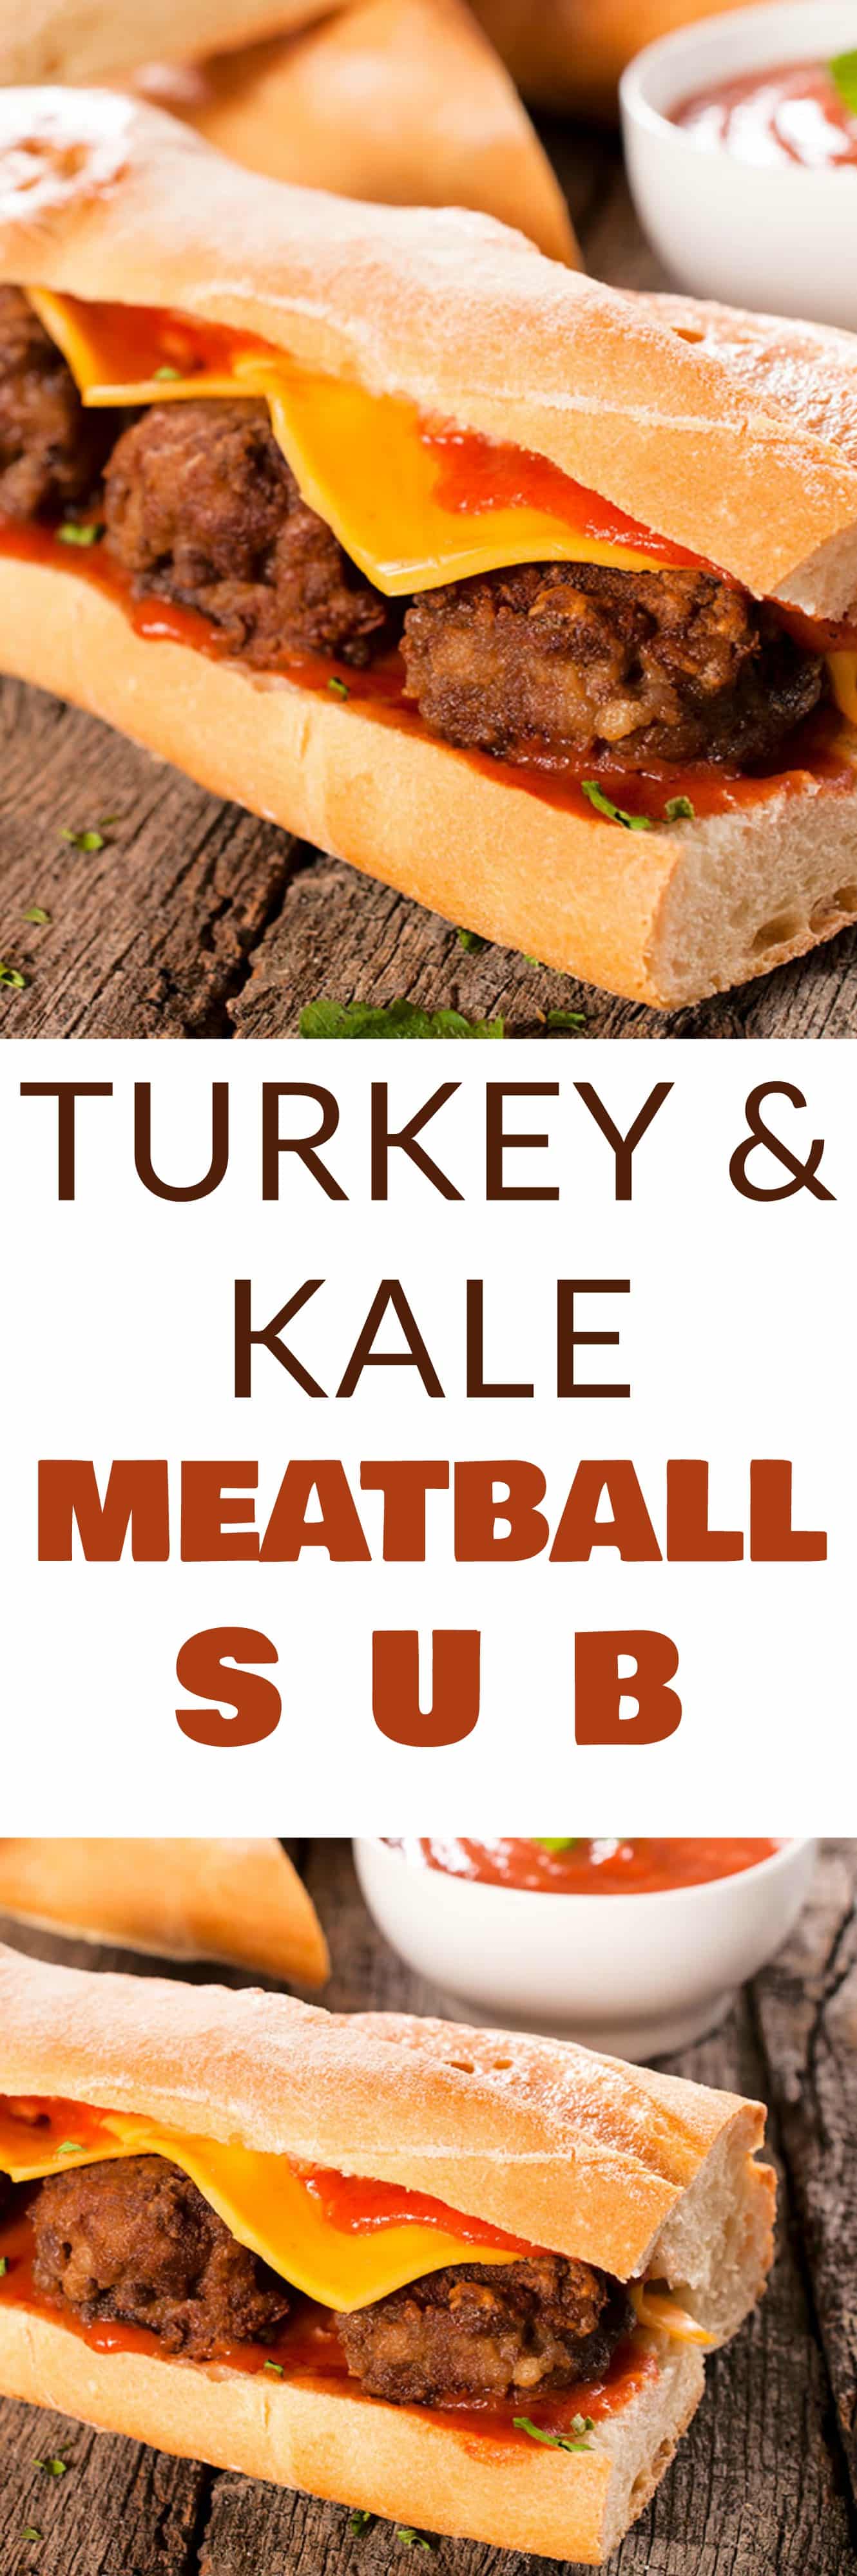 HEALTHY Ground Turkey and Kale Meatball Sub! These meatballs are fried on the stove and then covered with tomato sauce and American cheese on asub roll! This homemade recipe is easy, healthy and your family will love it! Even my Midwest husband thinks this is the BEST meatball sandwich!